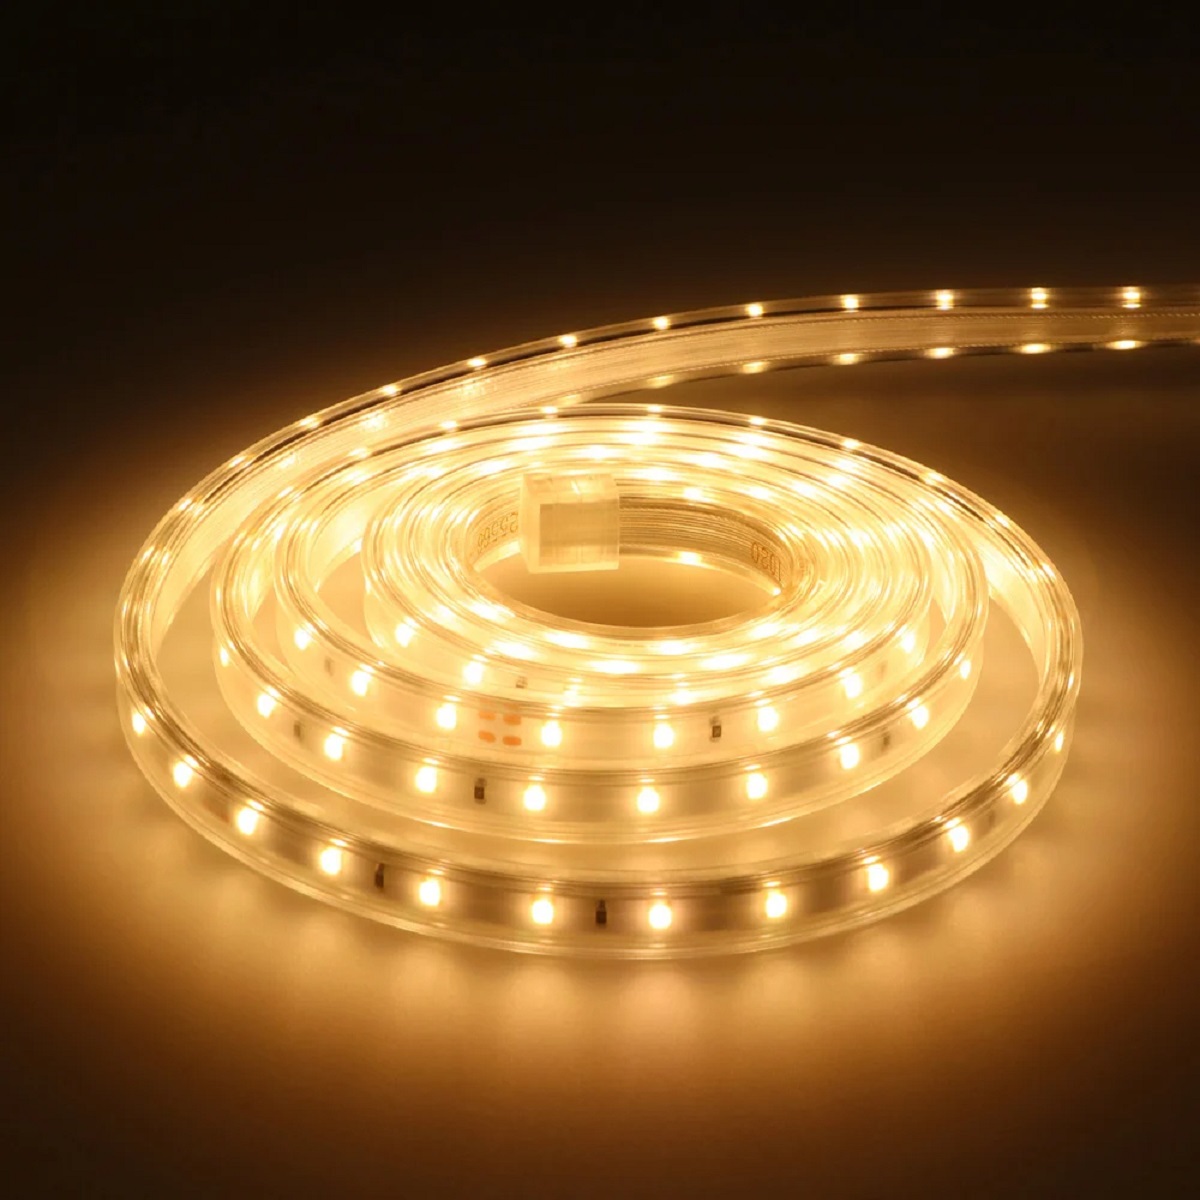 6FT - USB Powered - 5V LED COB Strip Light Kit - Cuttable - Dimmer Switch  Included